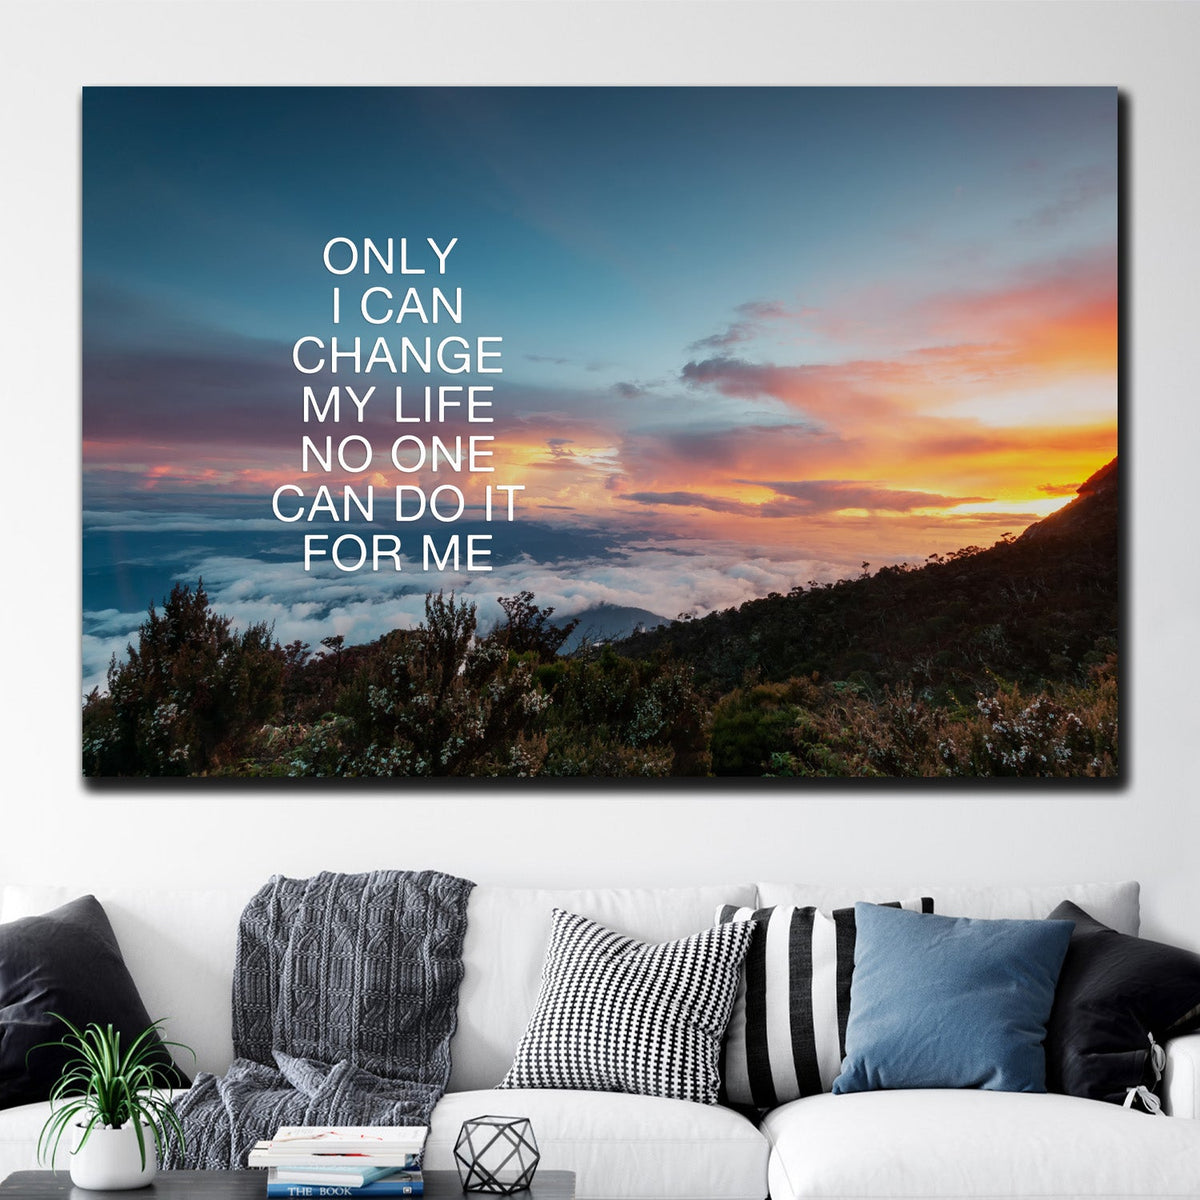 https://cdn.shopify.com/s/files/1/0387/9986/8044/products/ChangeMyLifeCanvasArtprintStretched-1.jpg